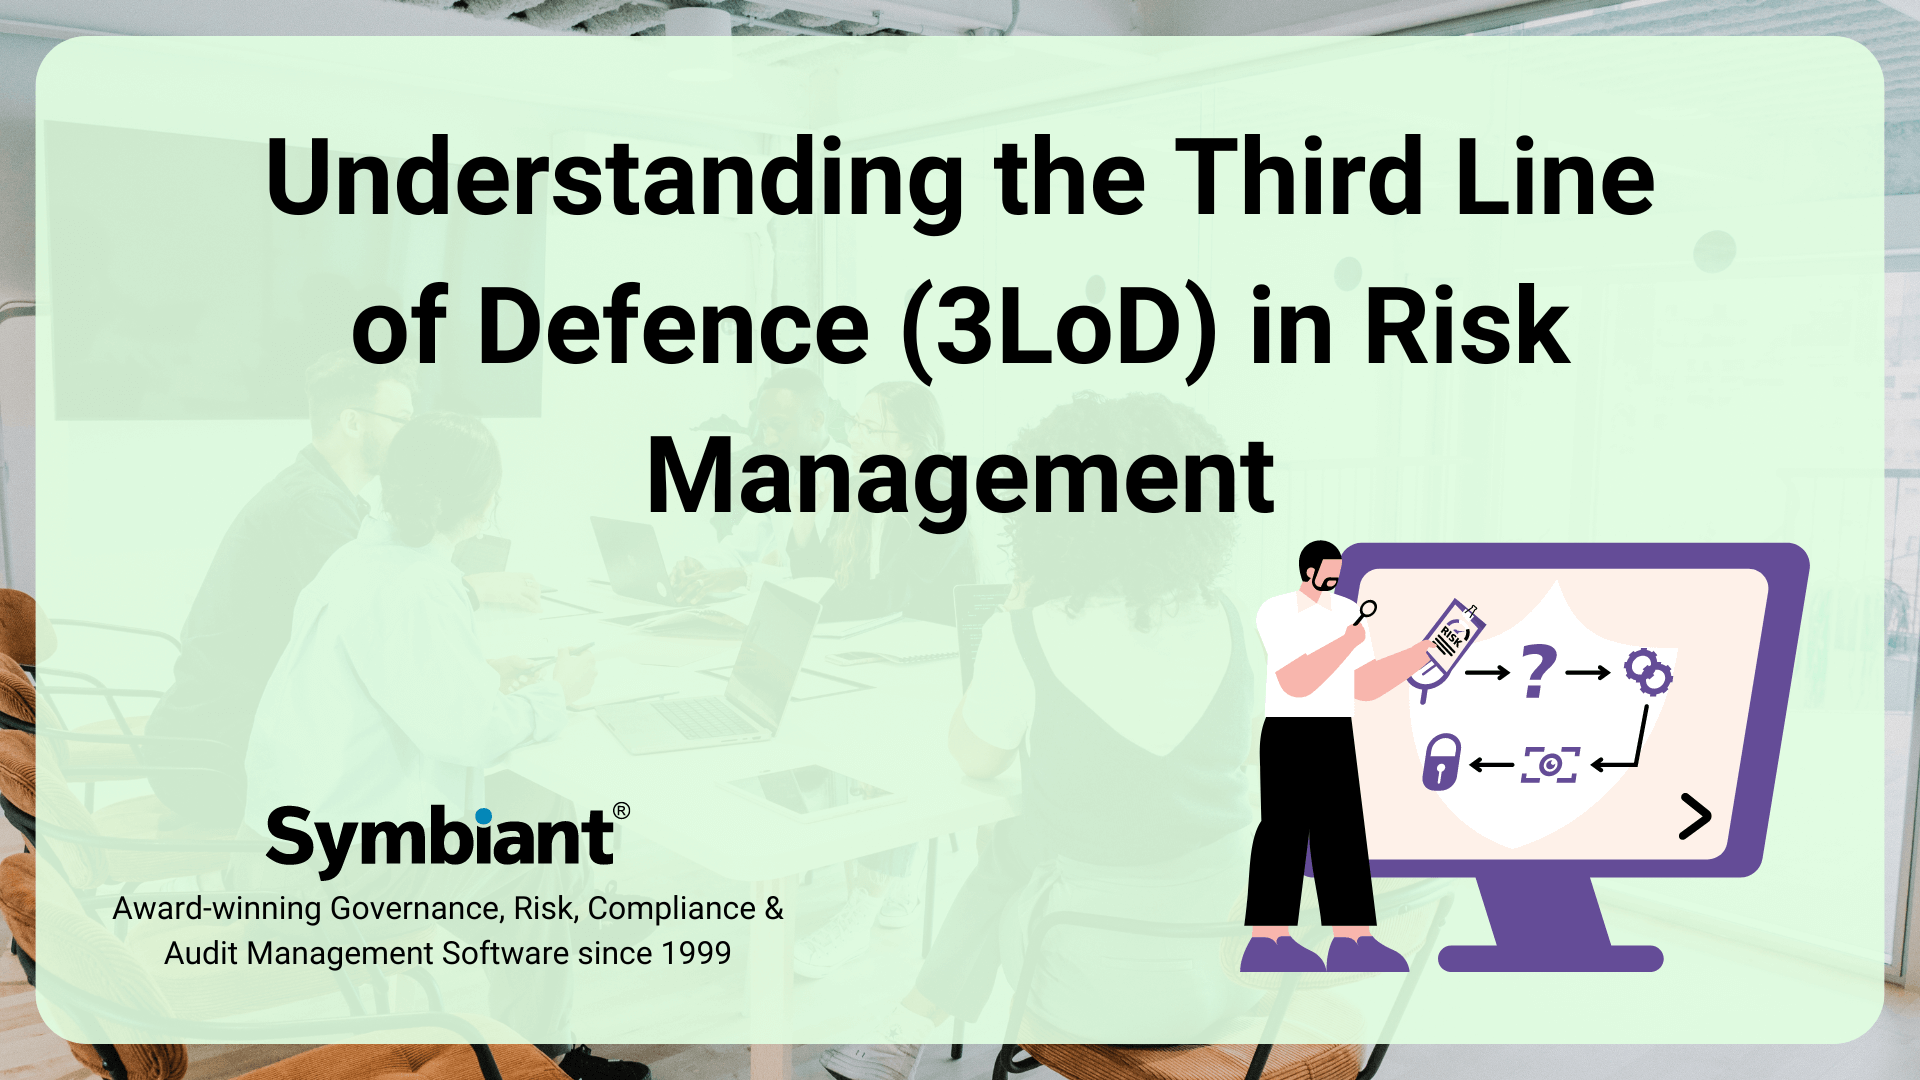 Understanding the Third Line of Defence (3LoD) in Risk Management